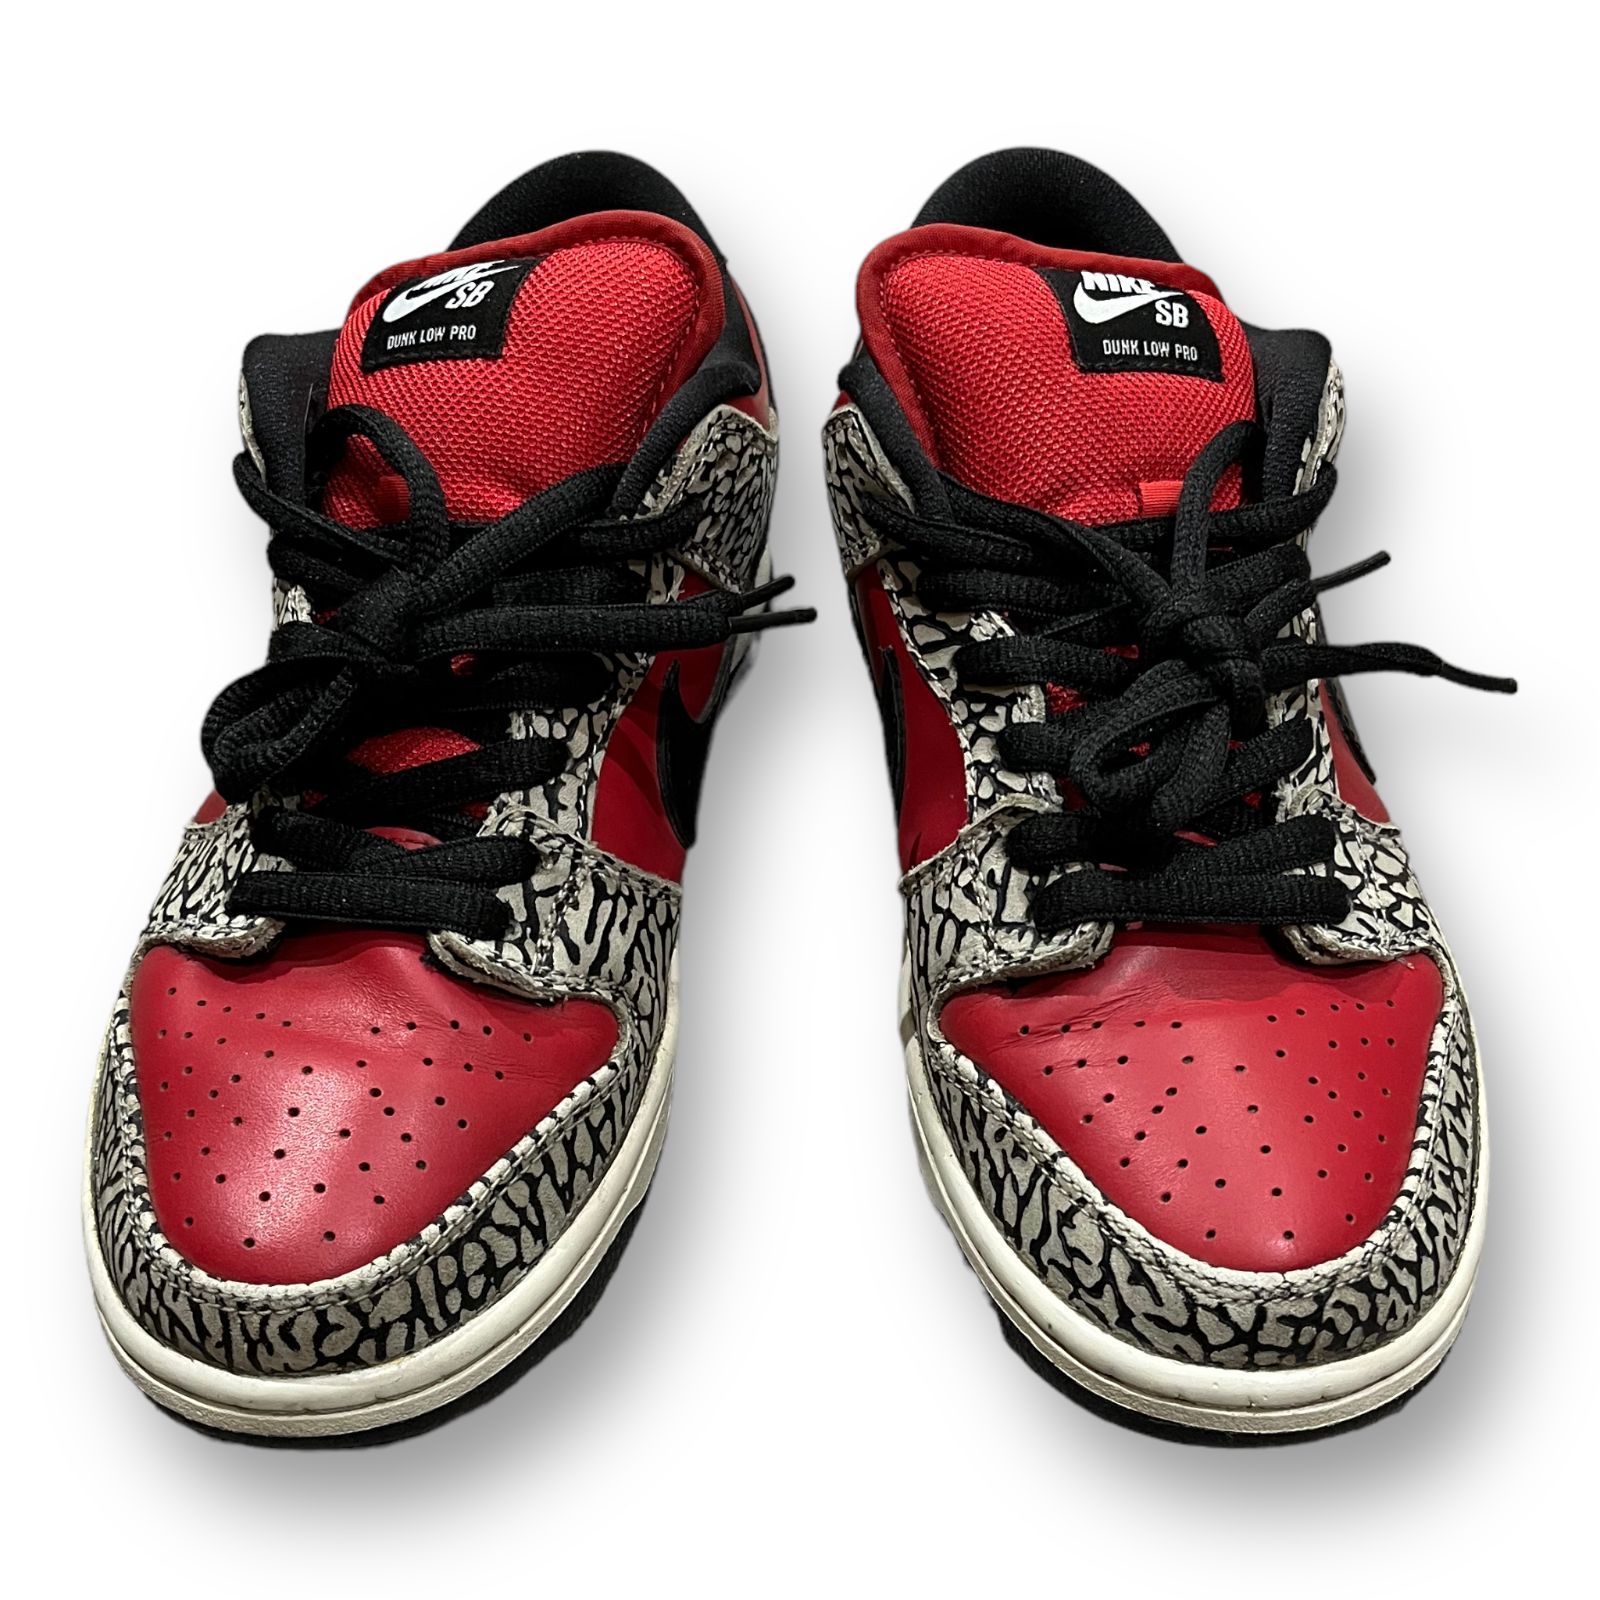 SUPREME NIKE SB Dunk Low Red Cement 2012年 313170-600 レッド